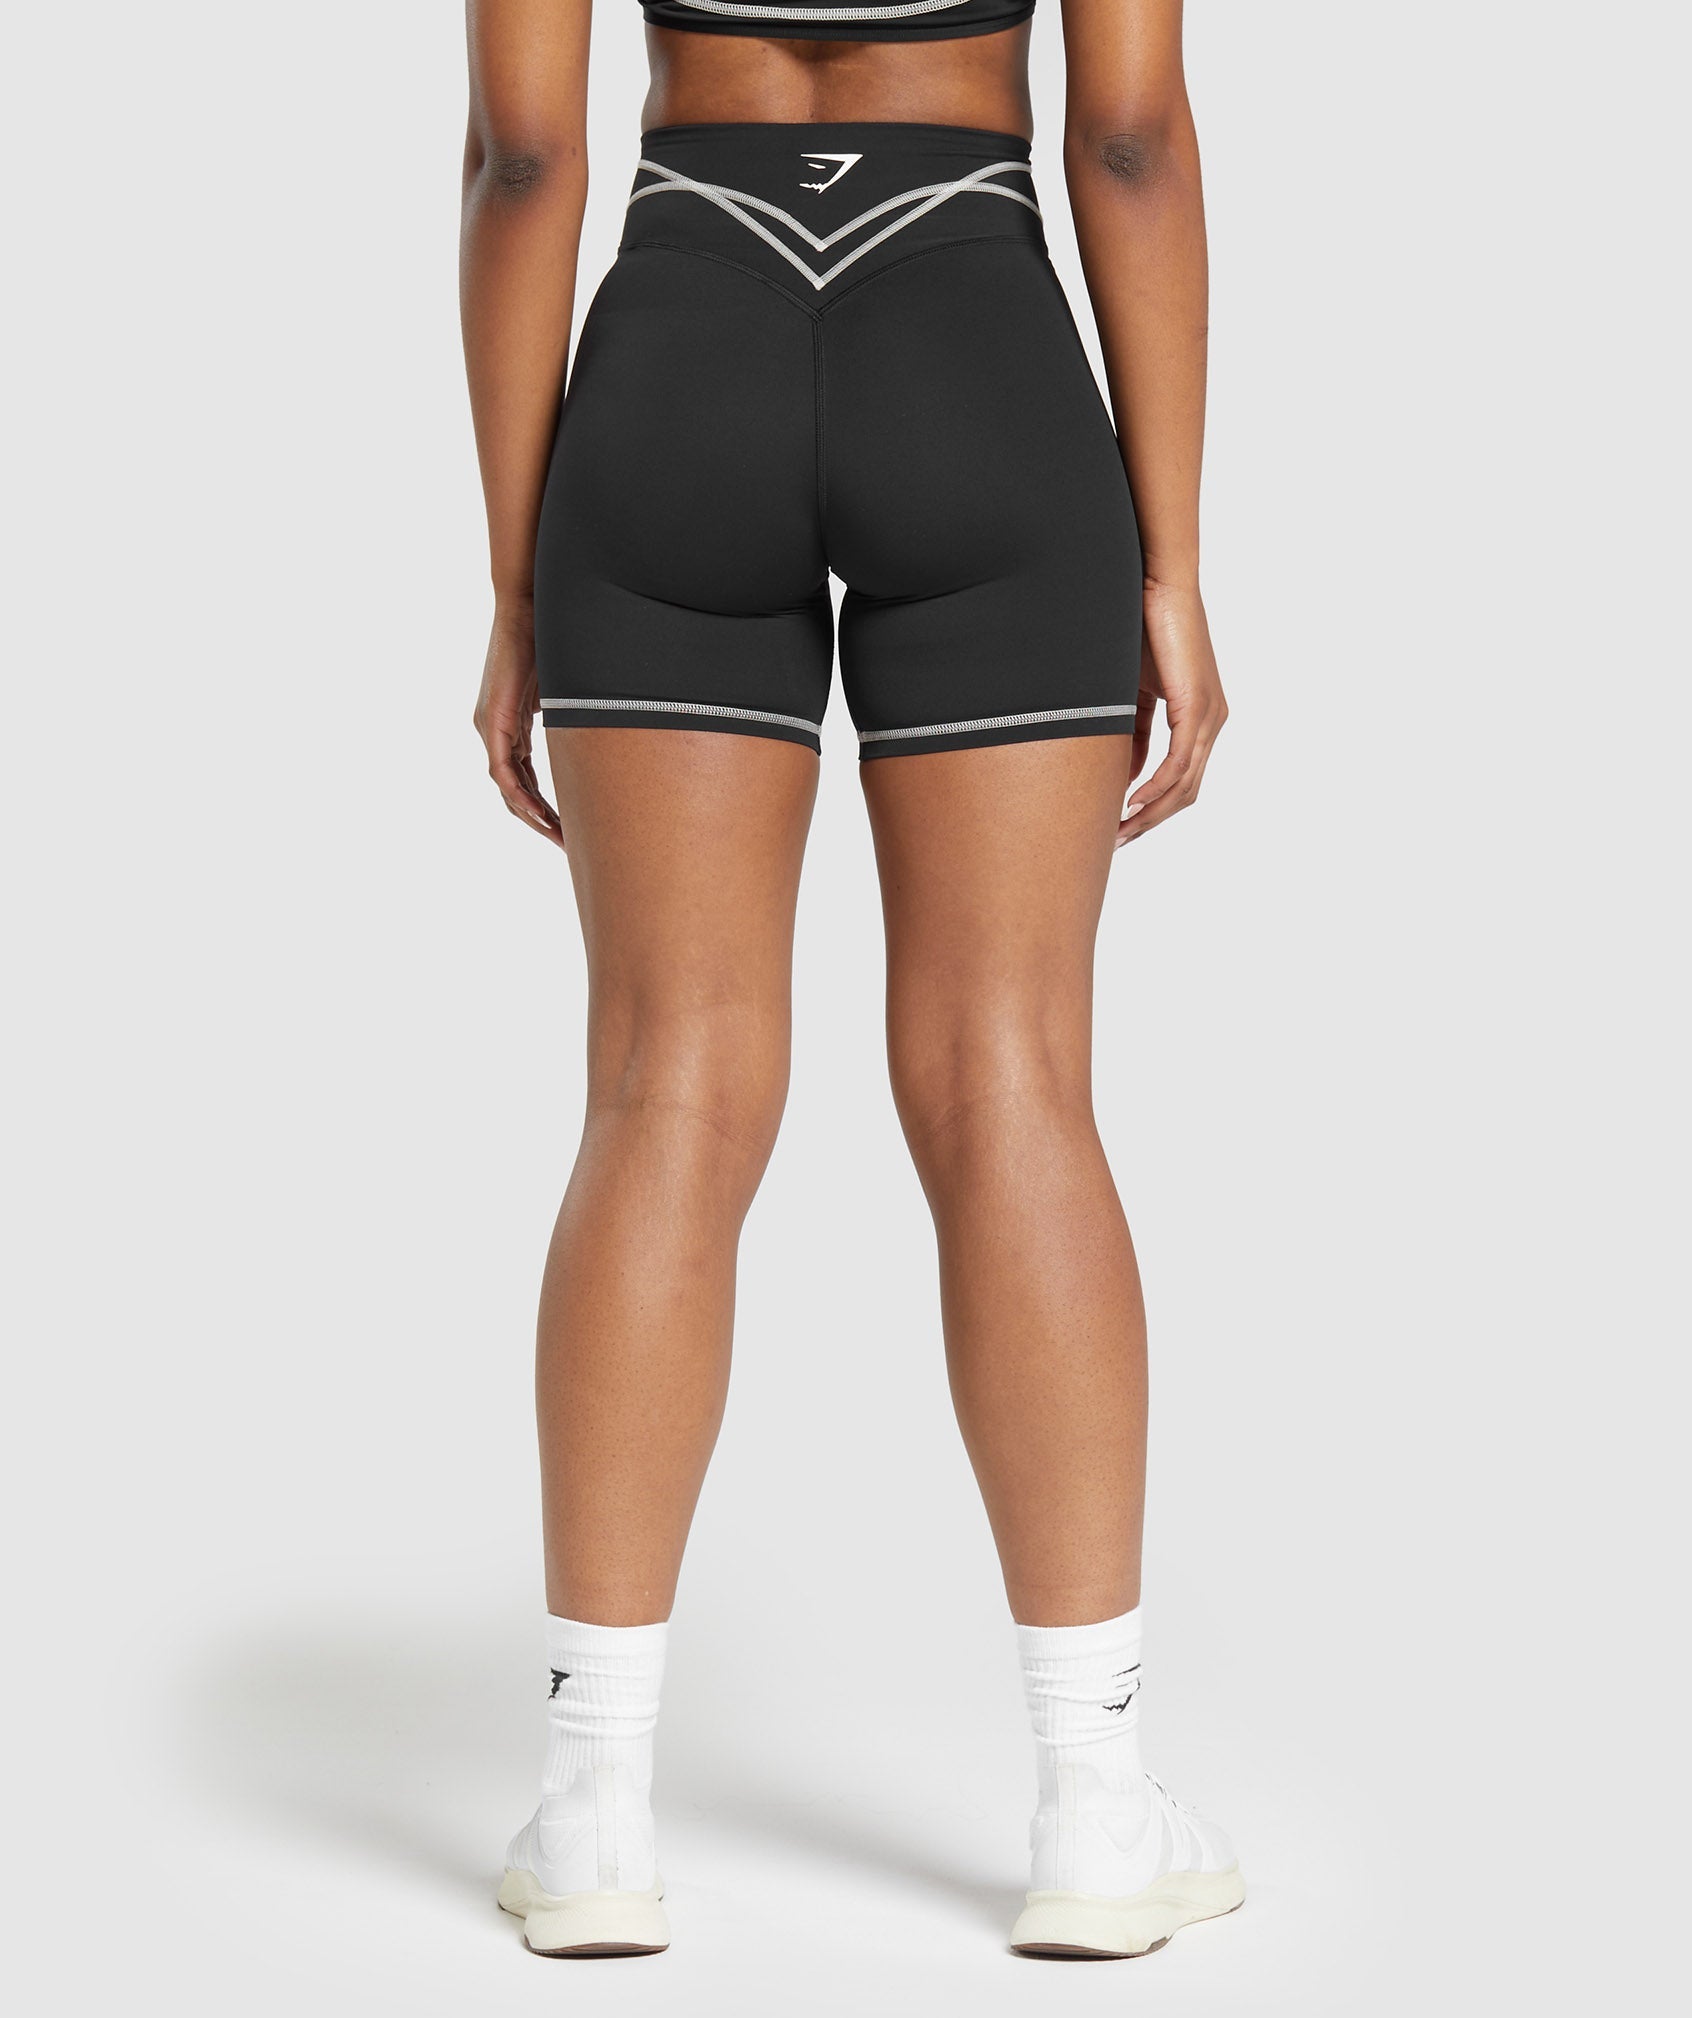 Stitch Feature Shorts in Black - view 2